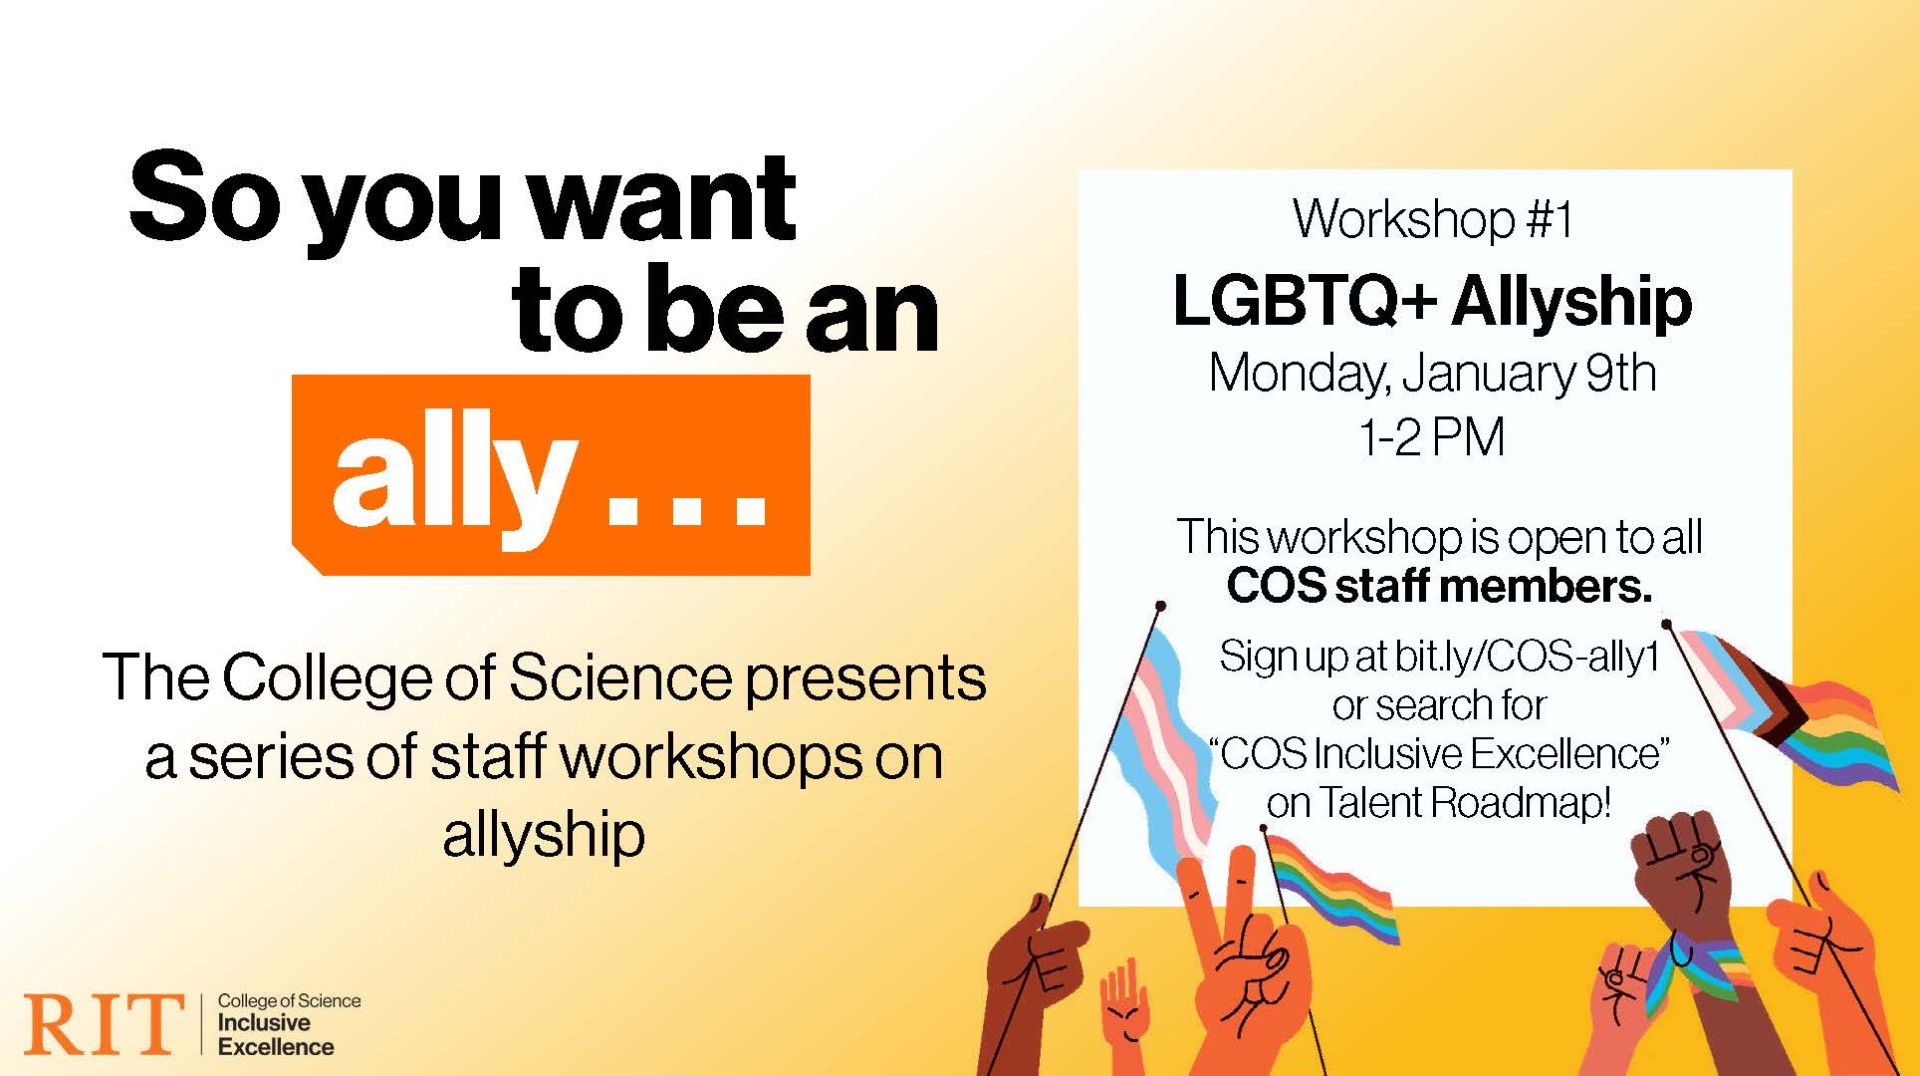 So you want ally . . . to be an The College of Science presents a series of staff workshops on allyship Workshop #1 LGBTQ+ Allyship Monday, January 9th 1-2 PM This workshop is open to all COS staff members. Sign up at bit.ly/COS-ally1 or search for “COS Inclusive Excellence” on Talent Roadmap